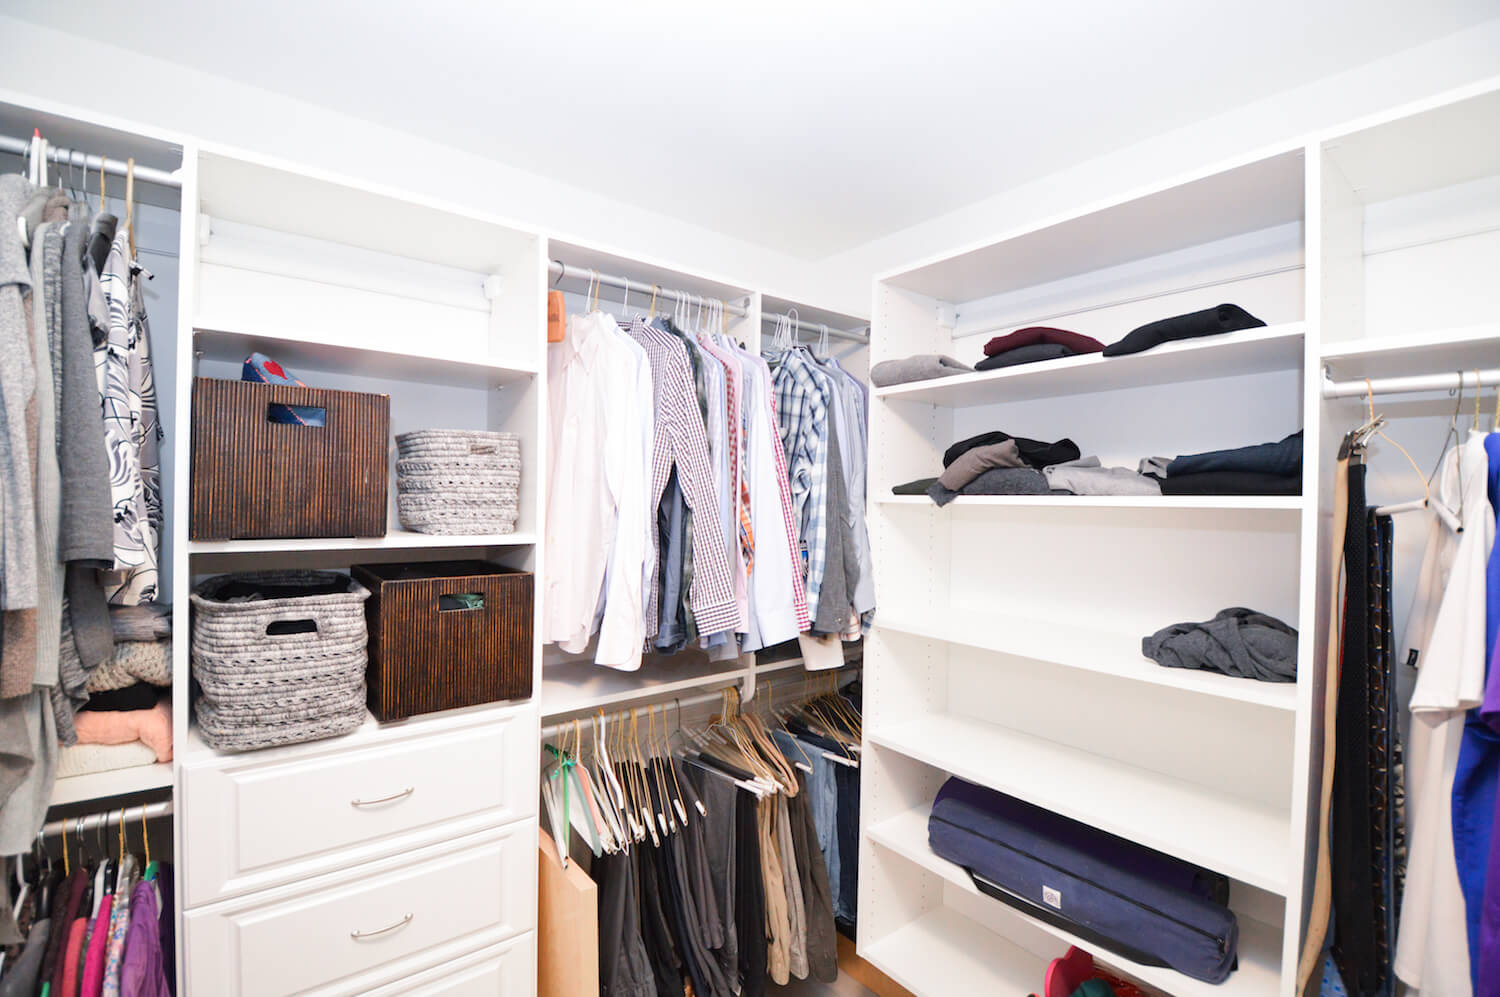 Remodeling-IndivSvc-Closets-Image2